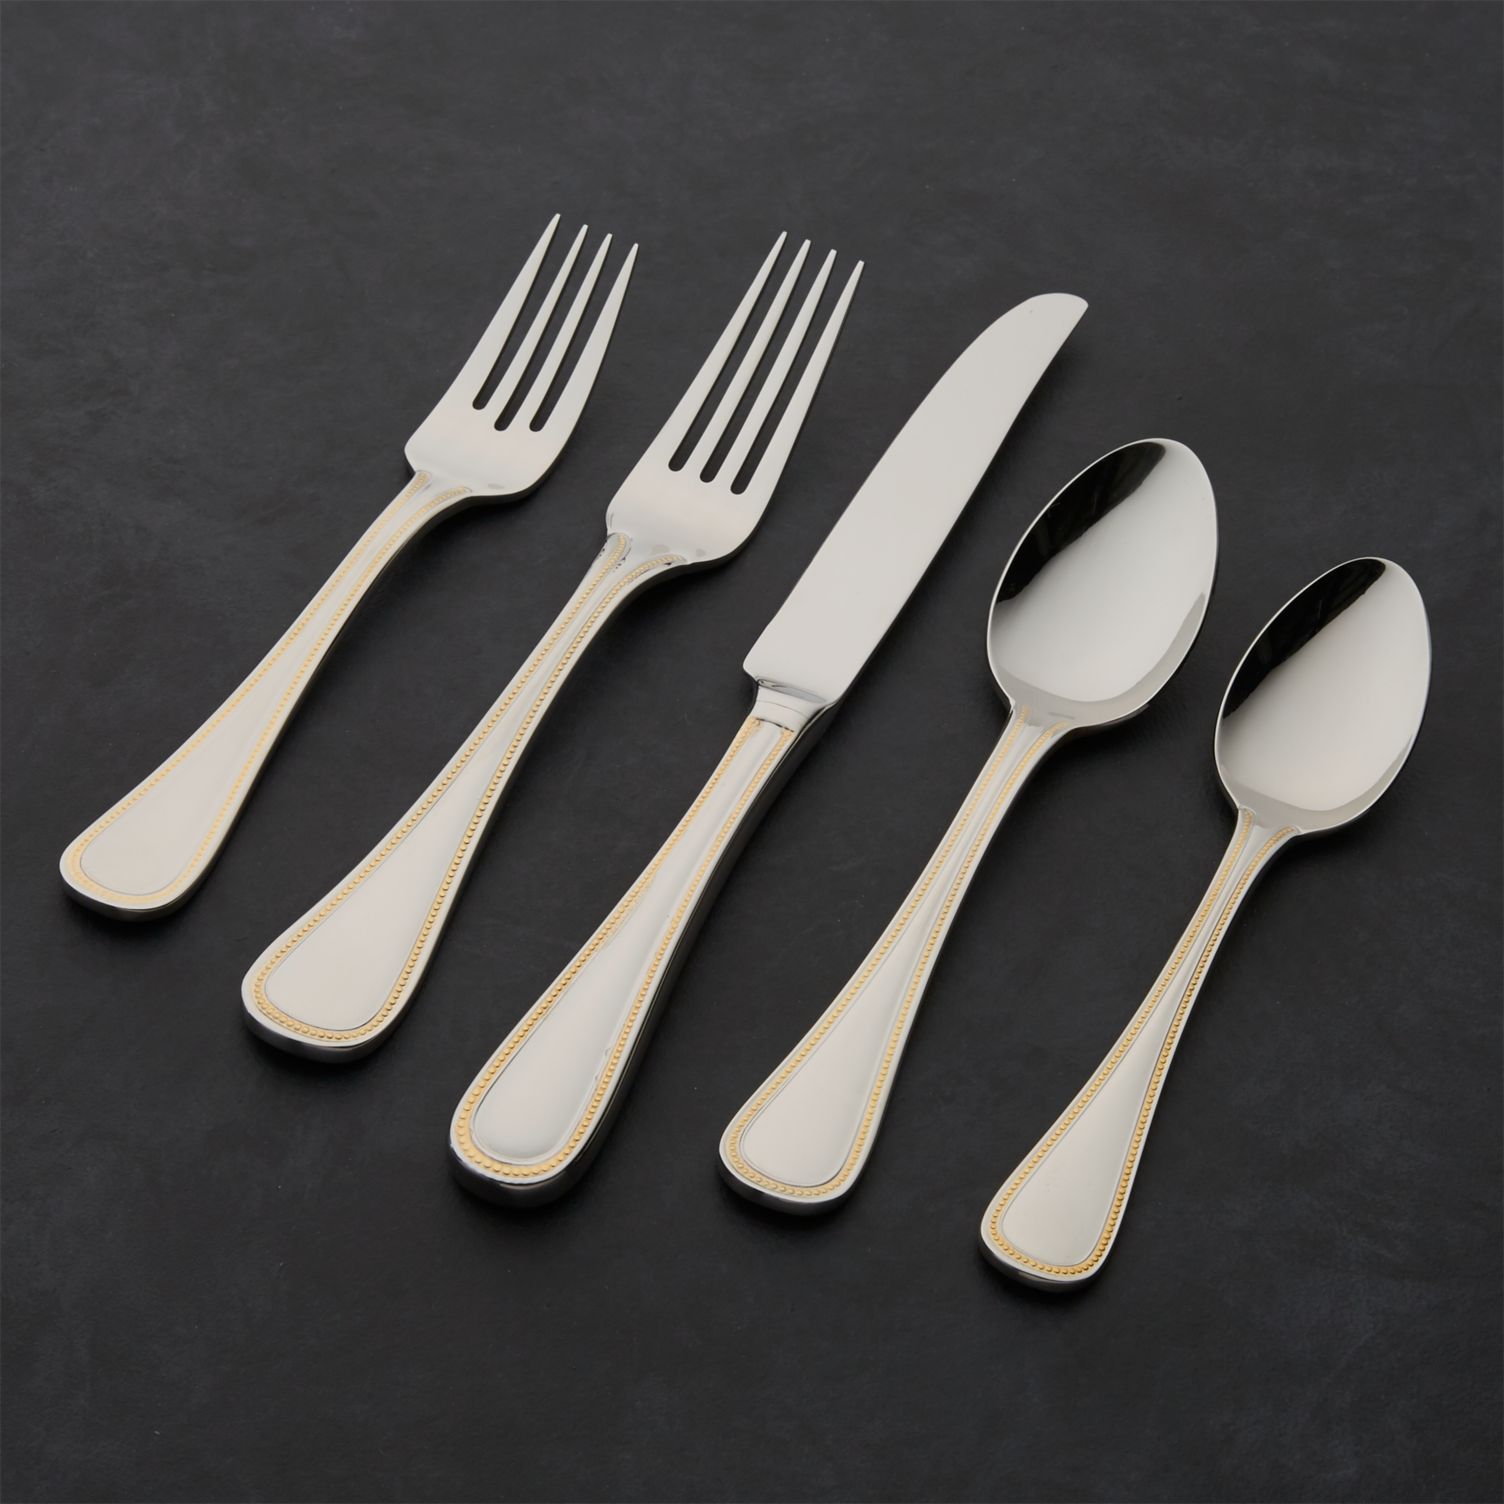 Grand-Hotel-flatware-with-gold-toned-beaded-border-95802